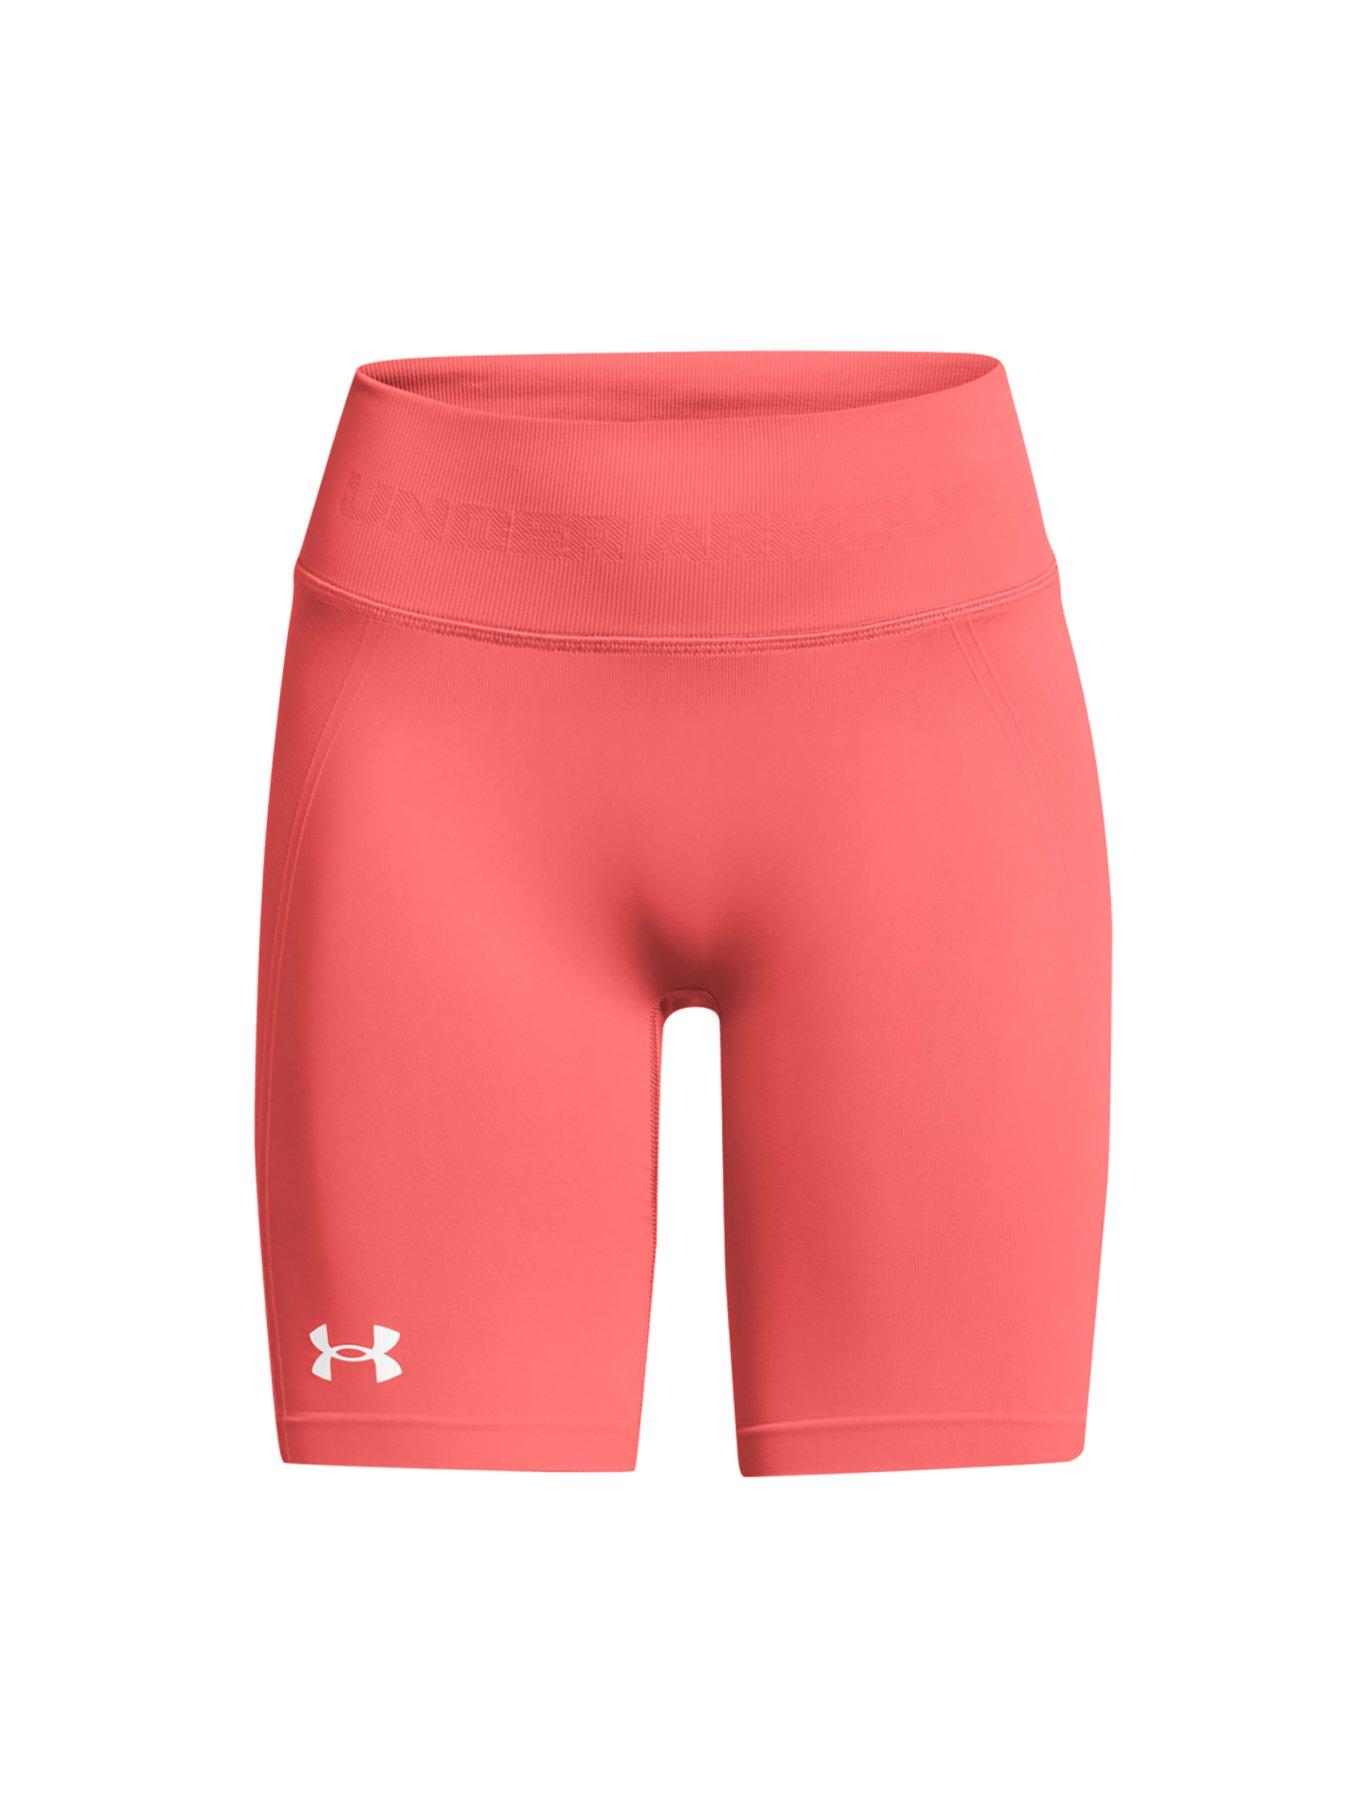 NIKE Pro Womens Compression Shorts - BARBIE PINK